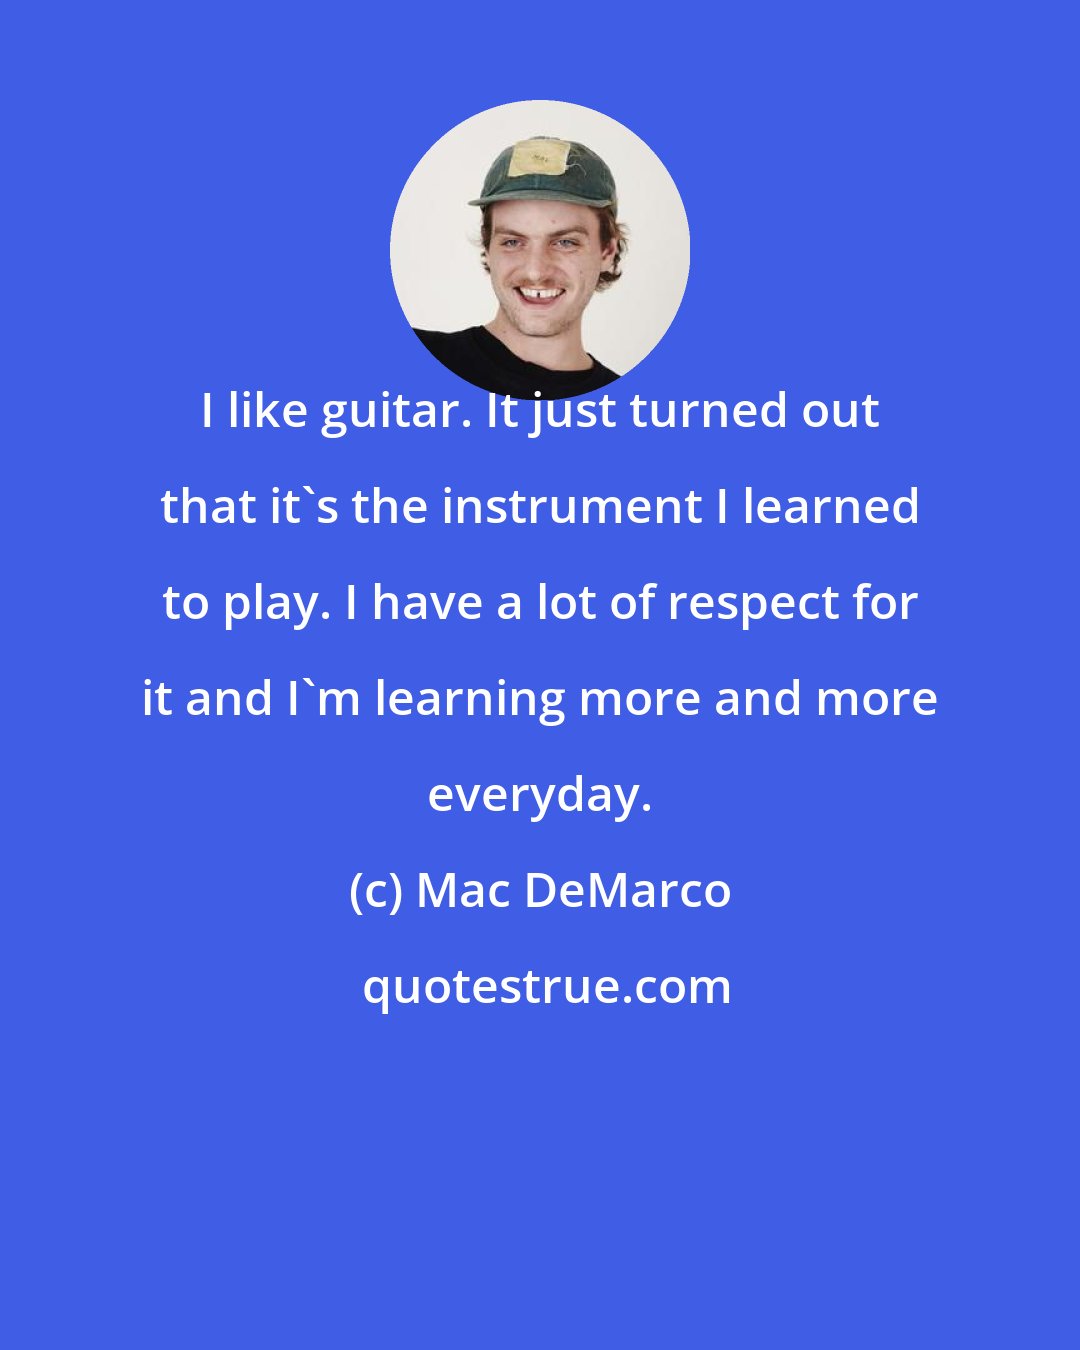 Mac DeMarco: I like guitar. It just turned out that it's the instrument I learned to play. I have a lot of respect for it and I'm learning more and more everyday.